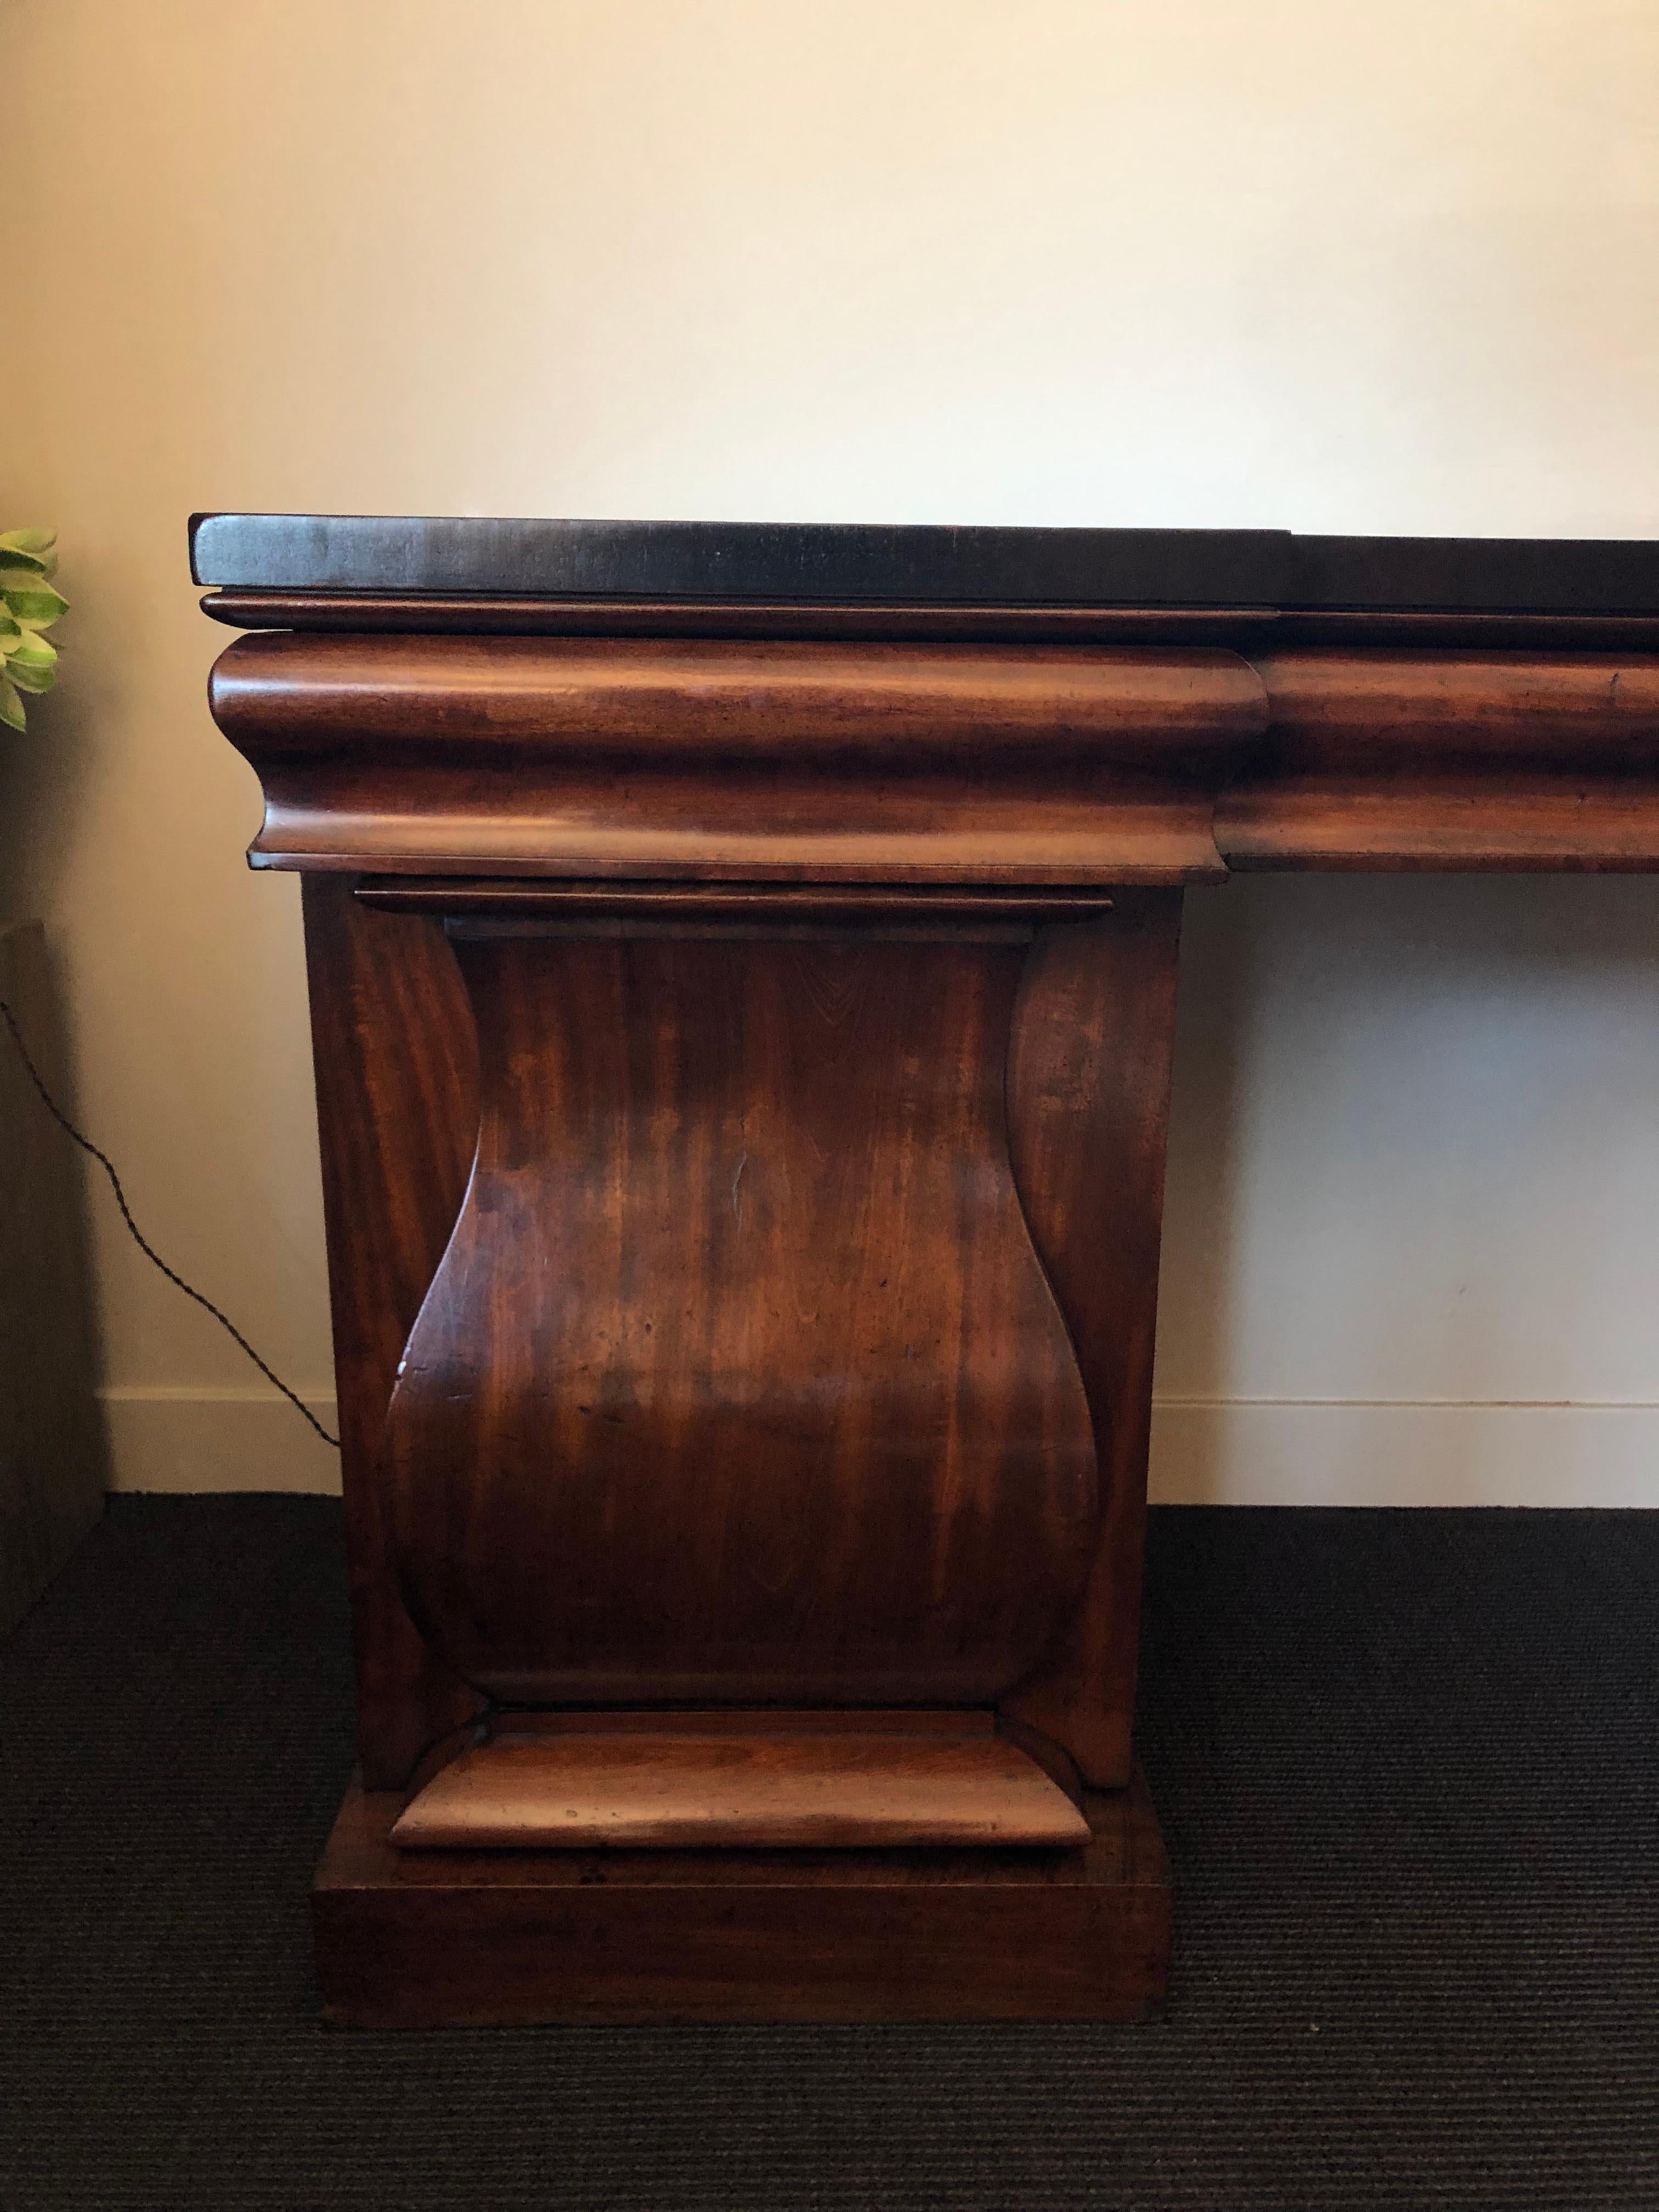 English 19th-century architectural mahogany sideboard. Stately and functional, this Victorian piece could also work as a serving table or credenza. A shaped upper frieze conceals drawers above pedestal plinth side cabinets with concealed interior